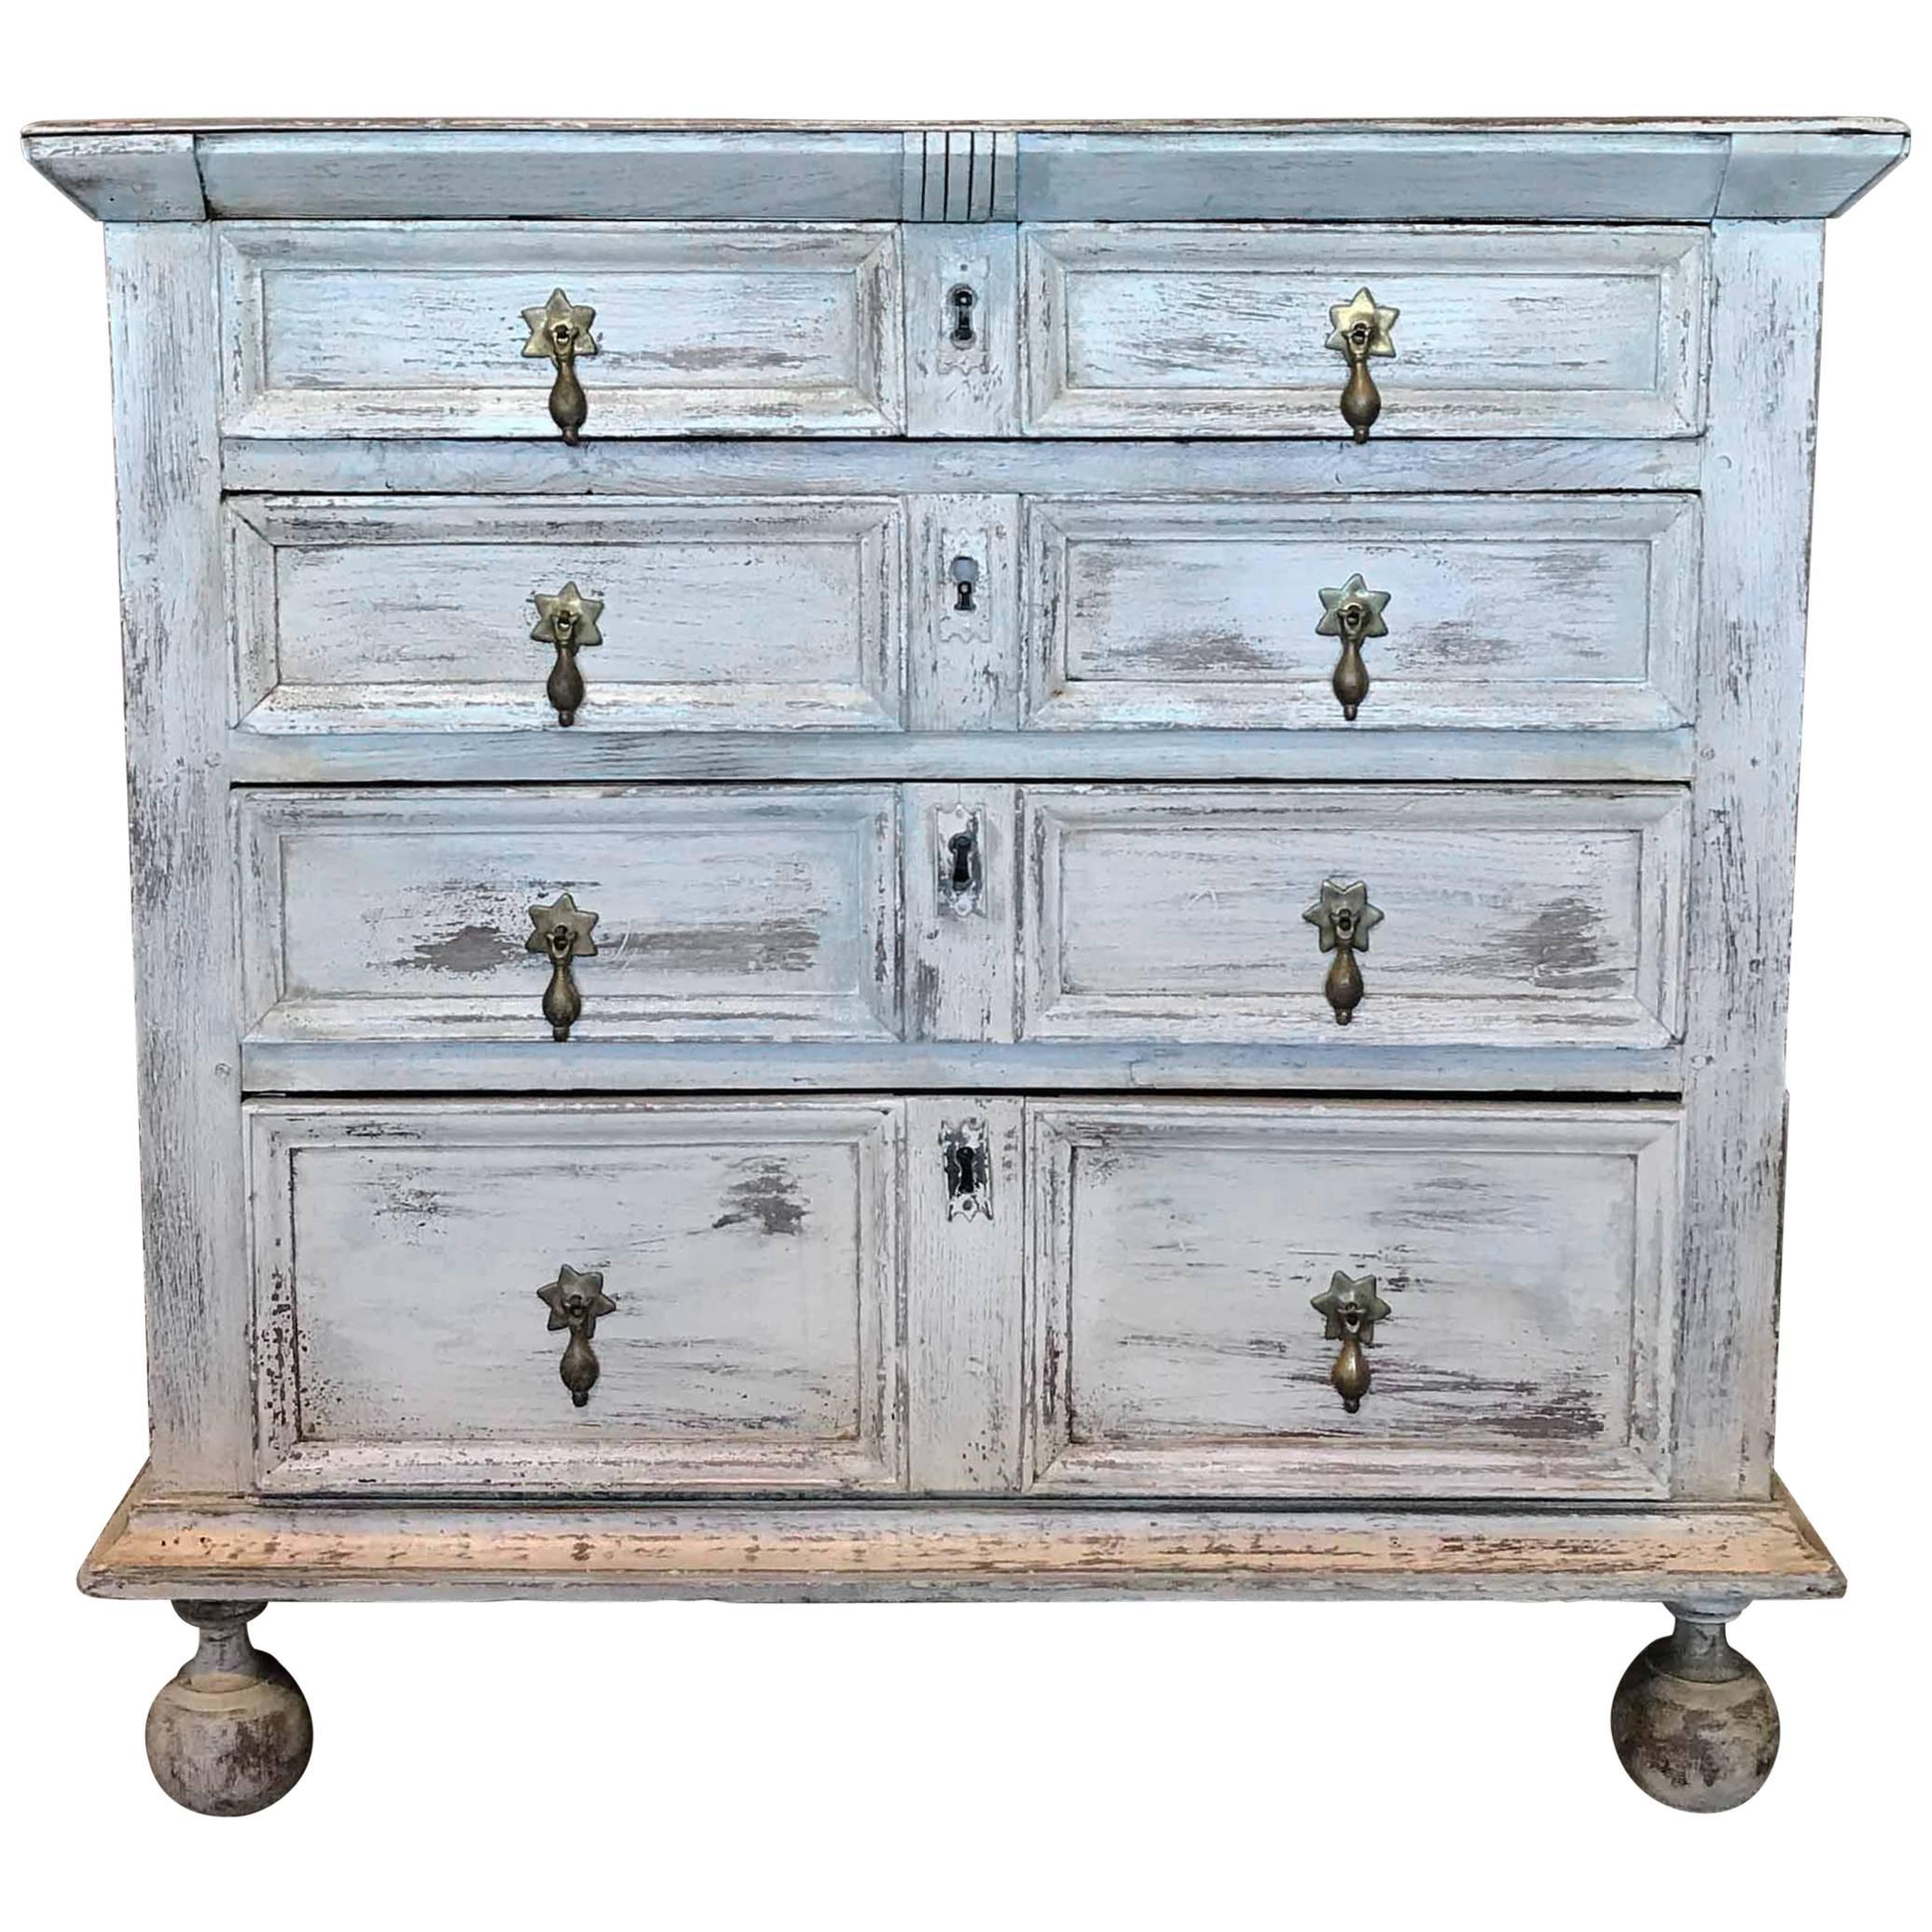 Antique English Chest of Drawers, circa 1810